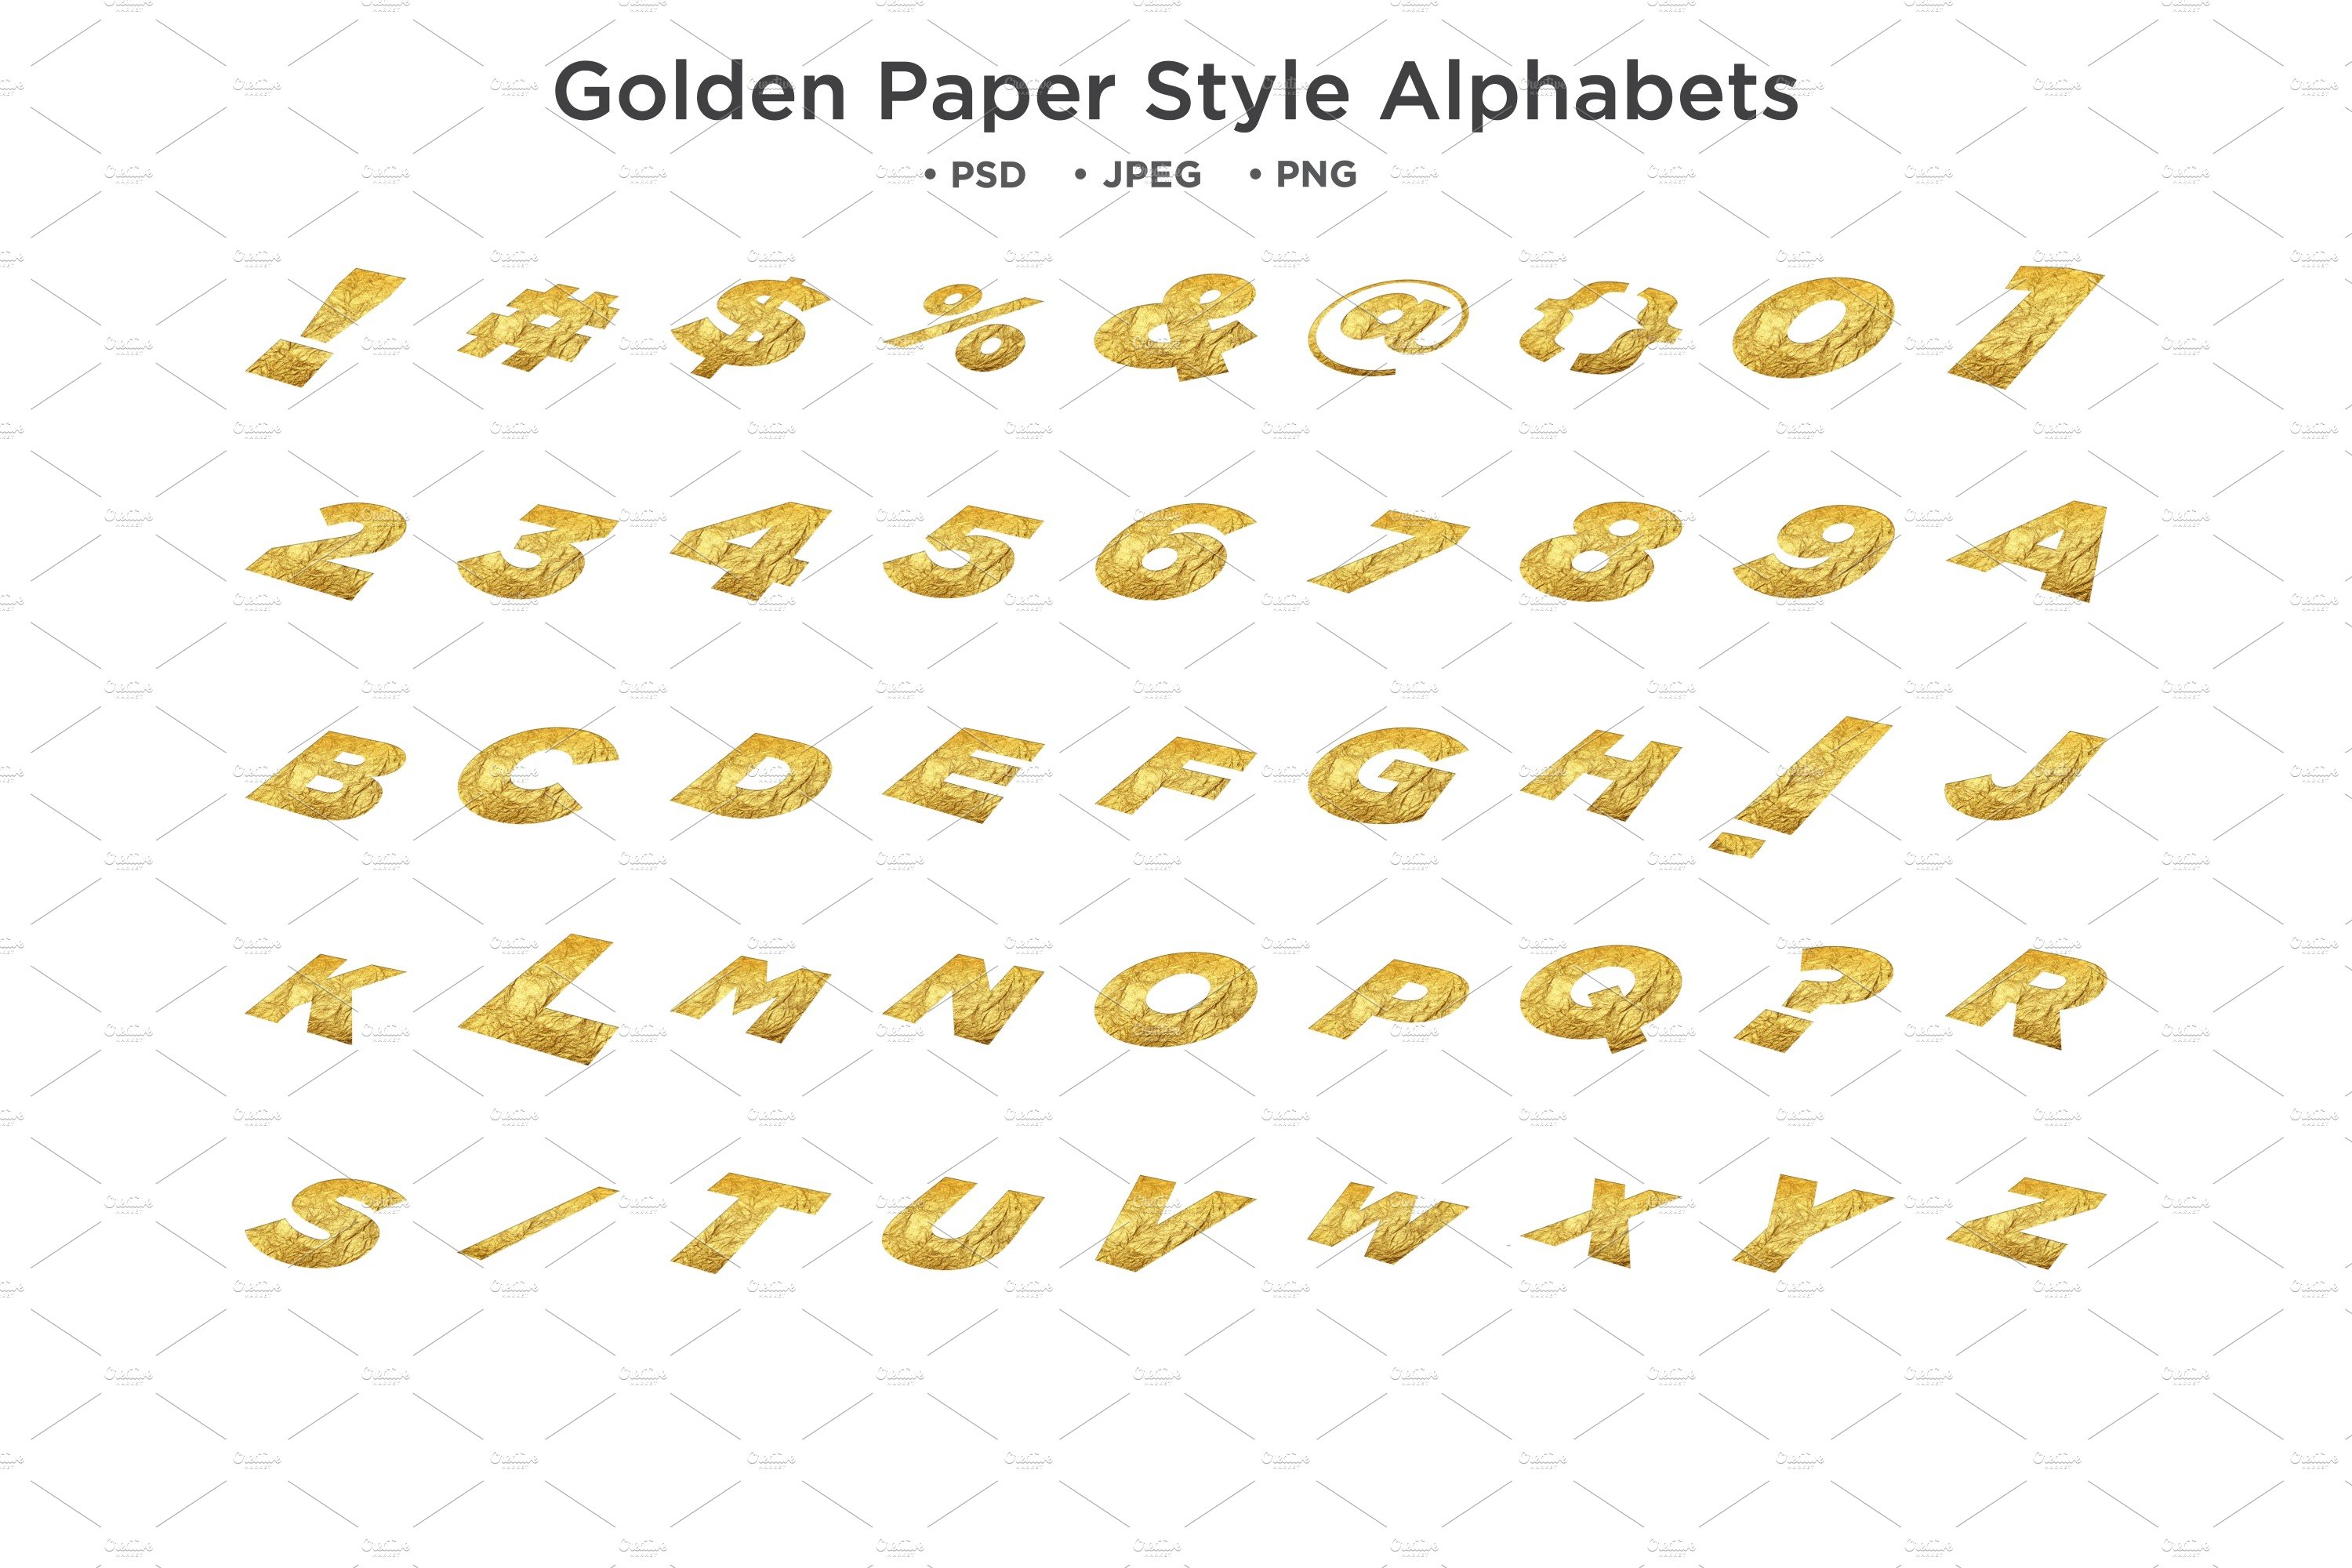 Golden Paper Alphabet Typographycover image.